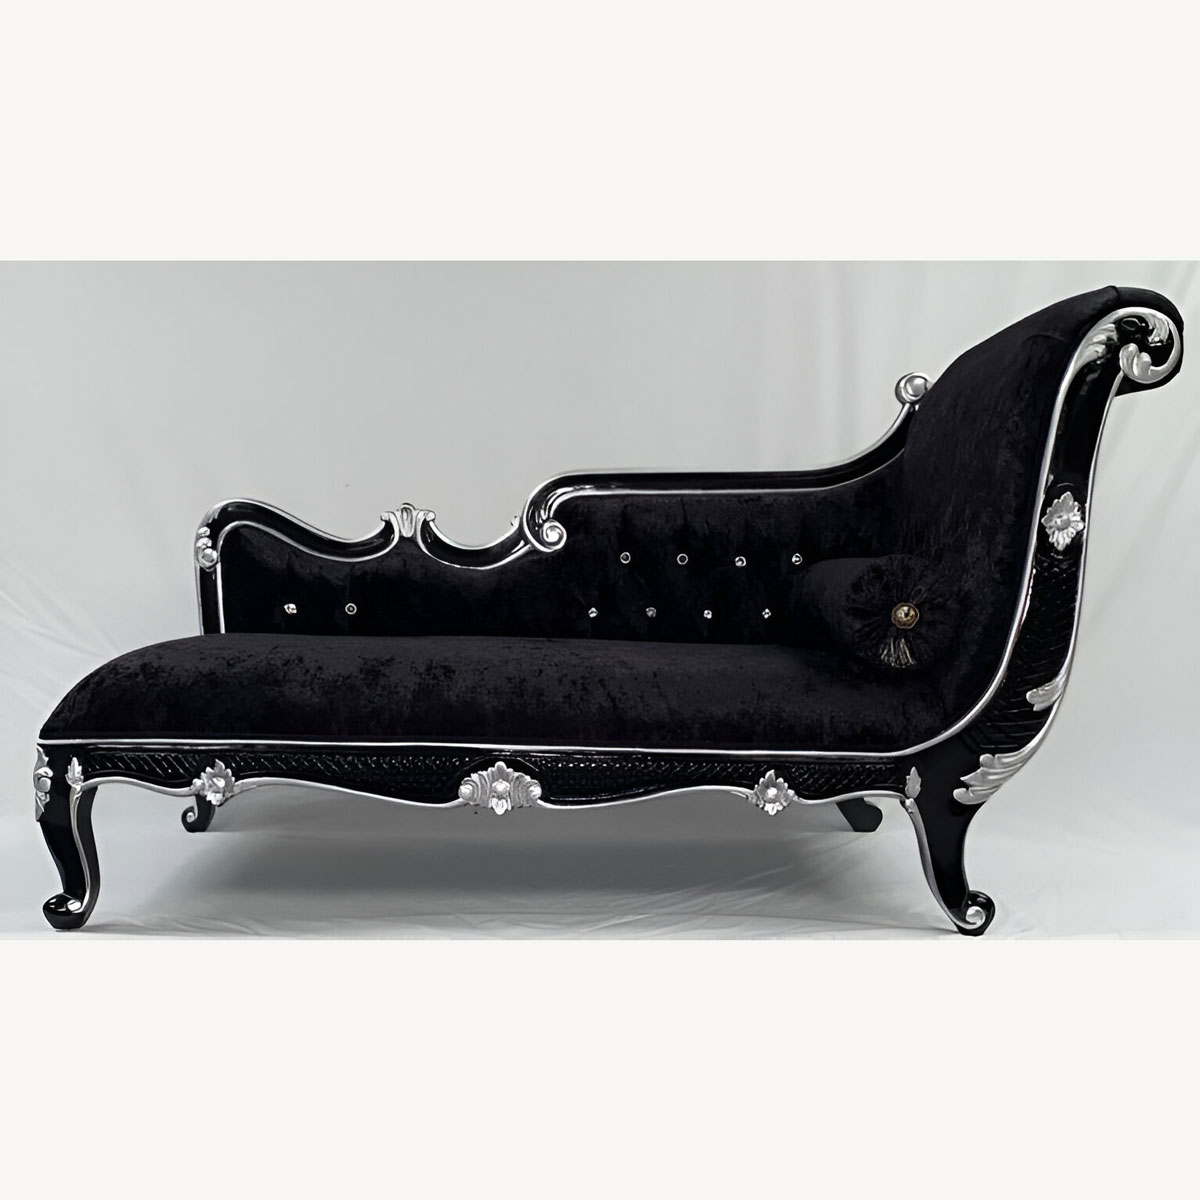 Armani Chaise Longue In Black With Silver Detailing And Blackberry Crushed Velvet Crystal Buttons Smaller Version 1 - Hampshire Barn Interiors - Armani Chaise Longue In Black With Silver Detailing And Blackberry Crushed Velvet Crystal Buttons Smaller Version -